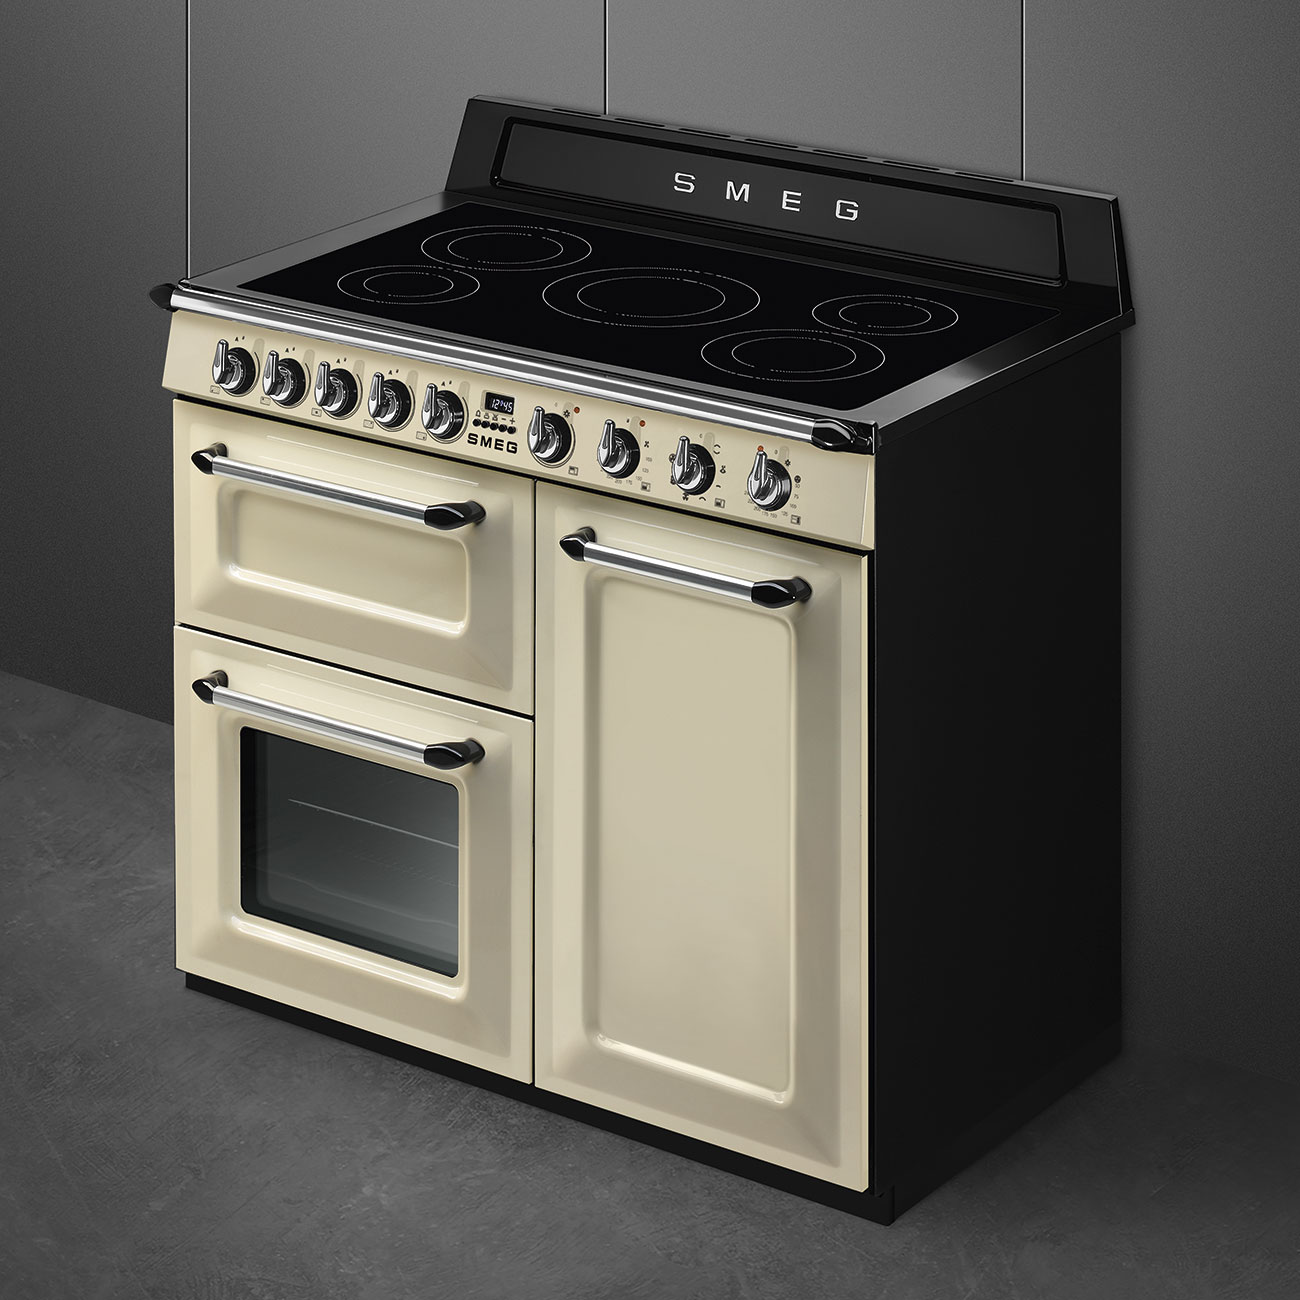 Smeg Cream Cooker with Induction Hob_2